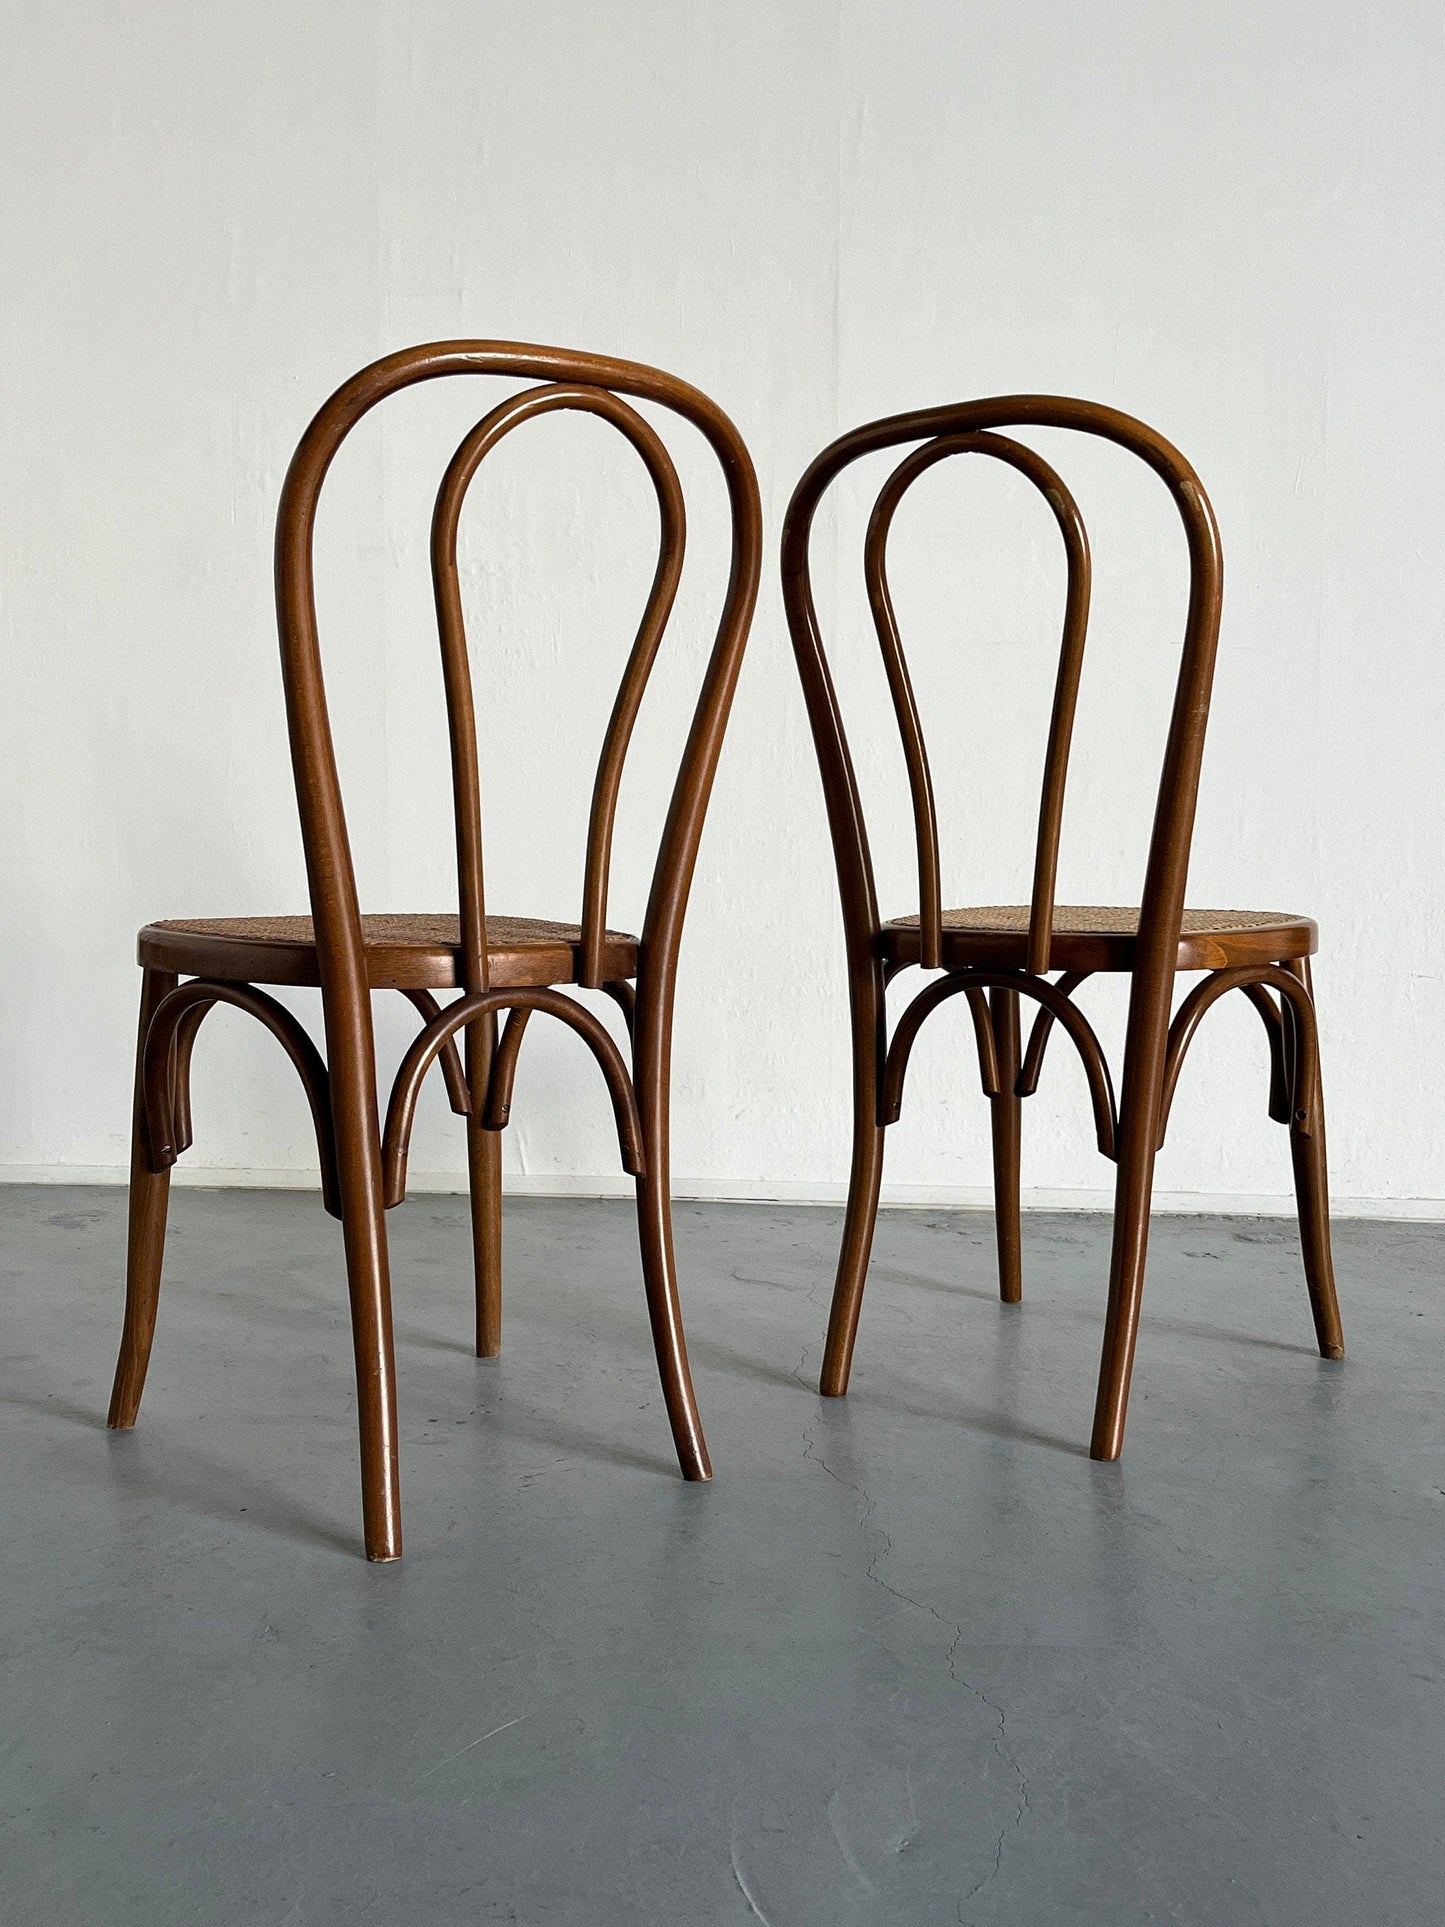 Set of 4 Thonet Bentwood Style Chairs No. 14 / European Cafe Dining Chairs, 1950s Vintage